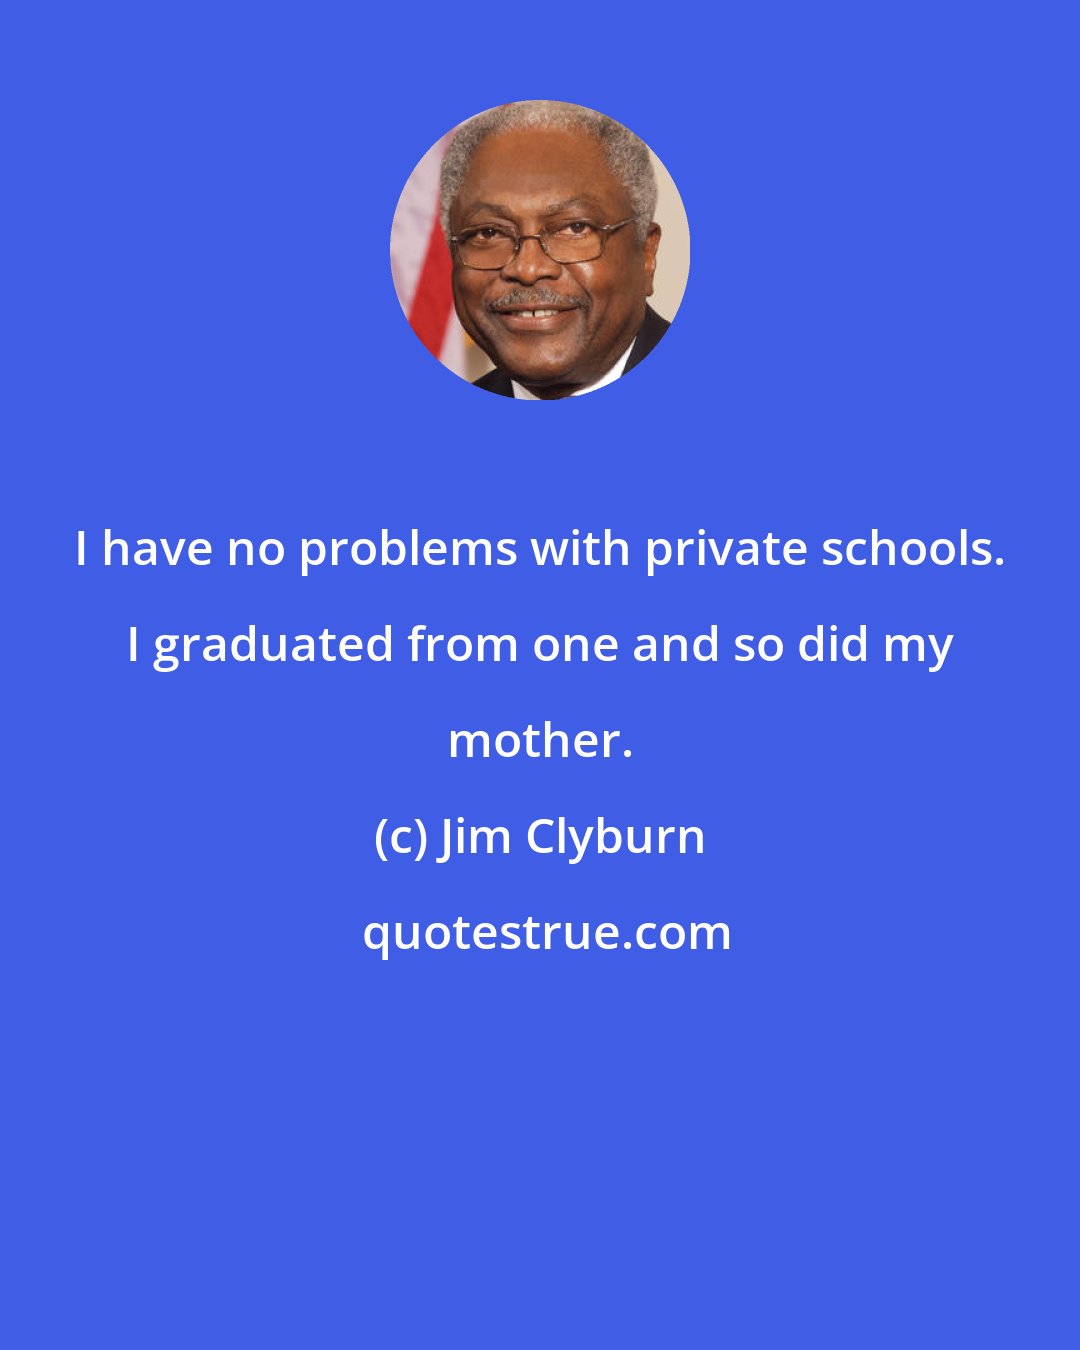 Jim Clyburn: I have no problems with private schools. I graduated from one and so did my mother.